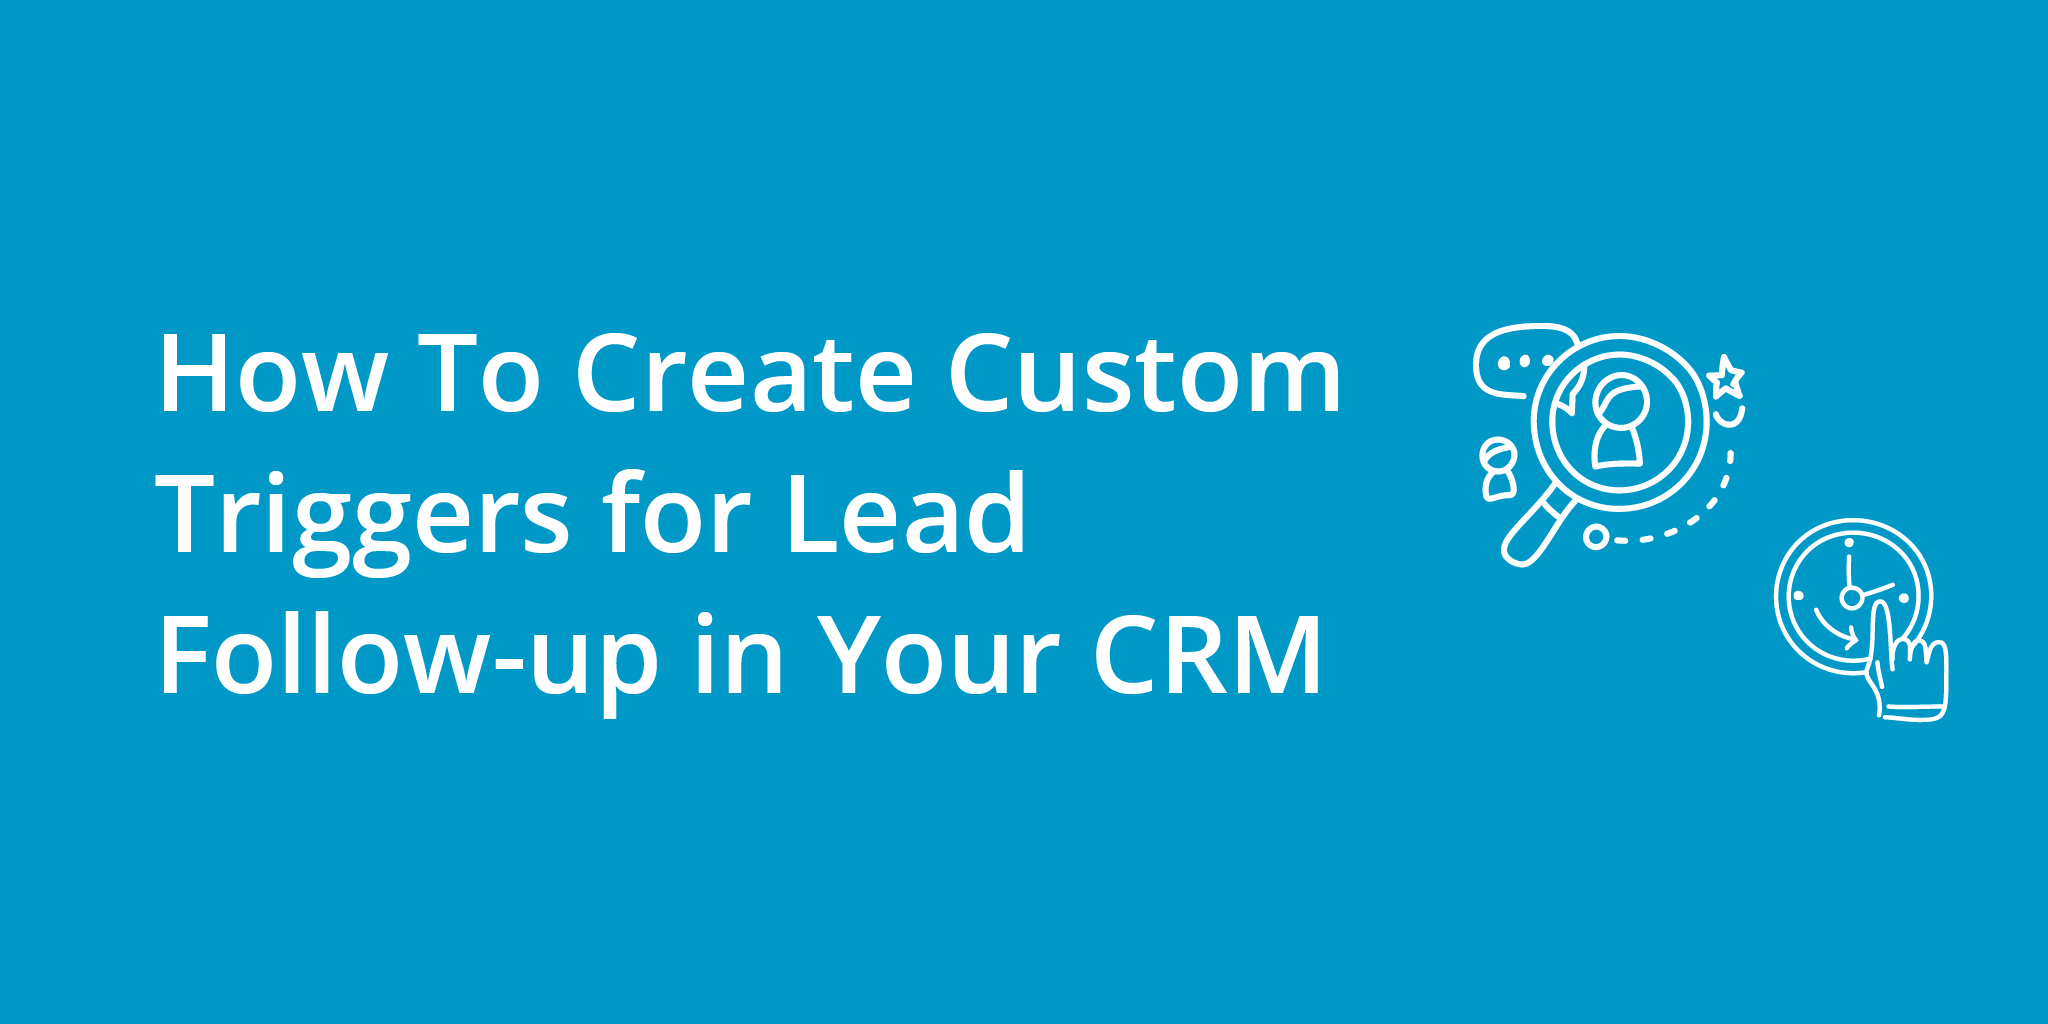 How To Create Custom Triggers for Lead Follow-up in Your CRM | Telephones for business